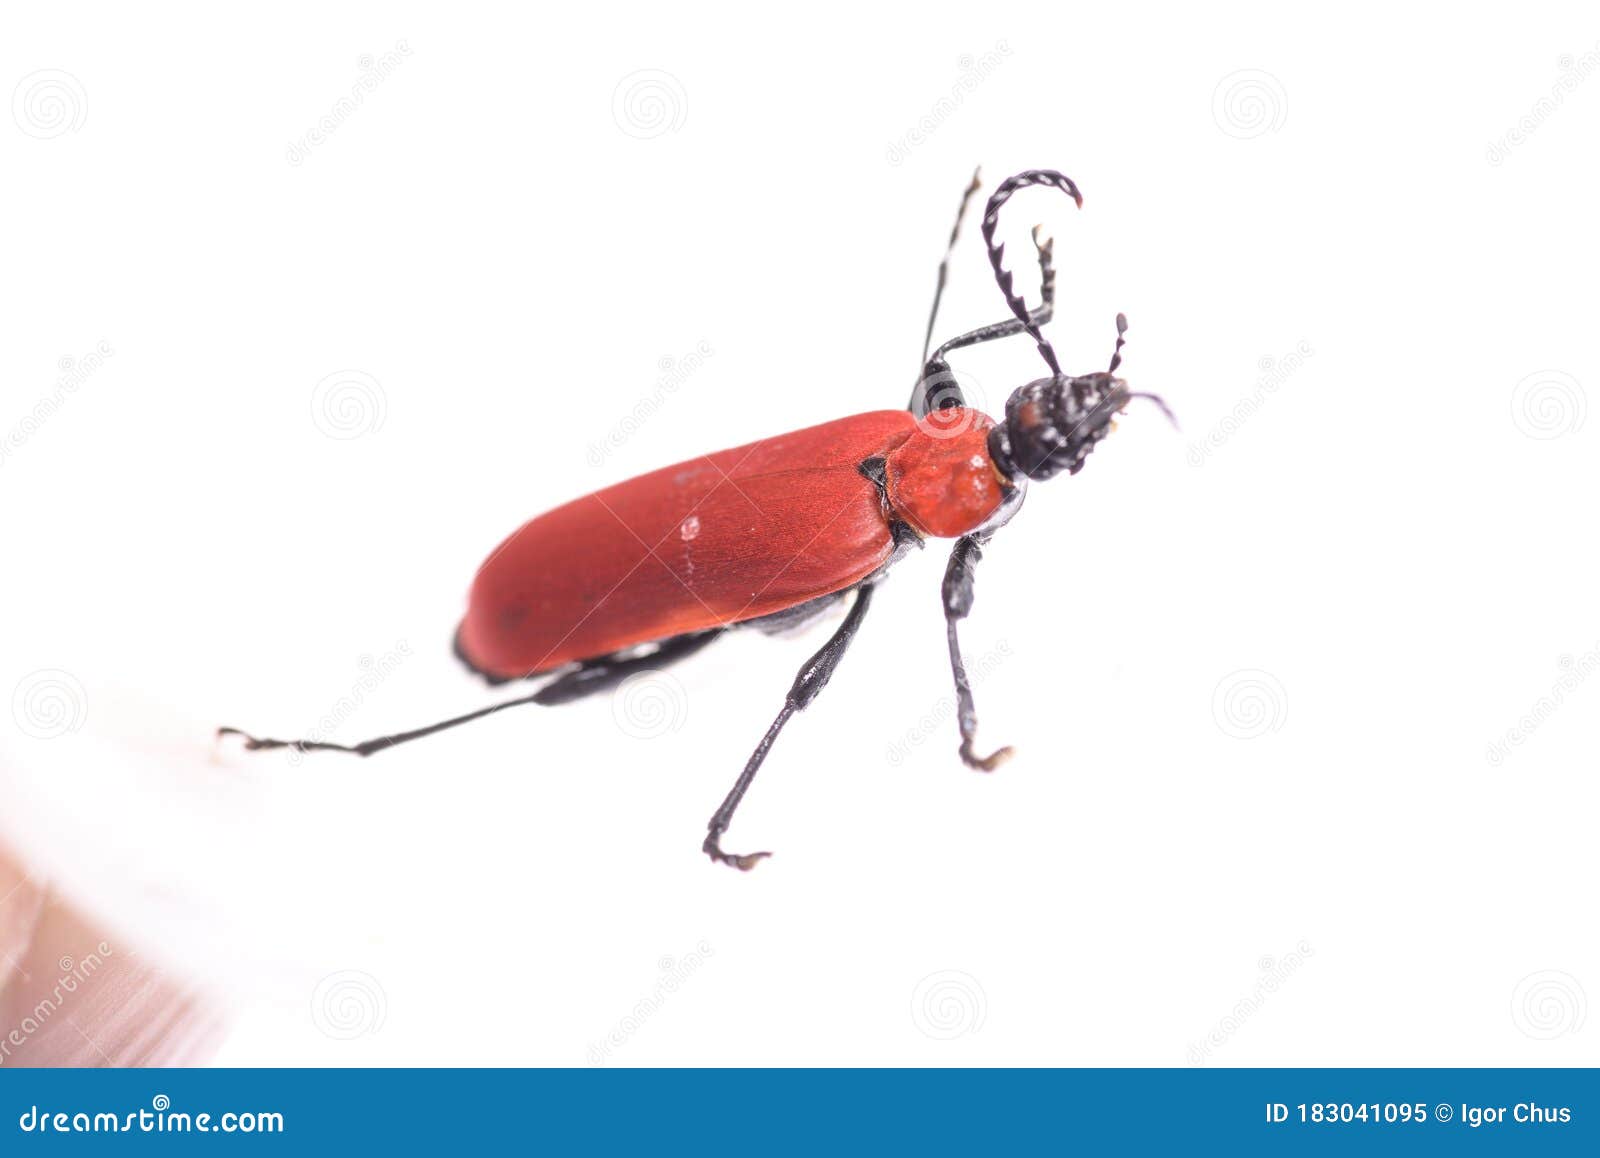 Insect with Black Mustache on a White Background Stock Image - Image of ...